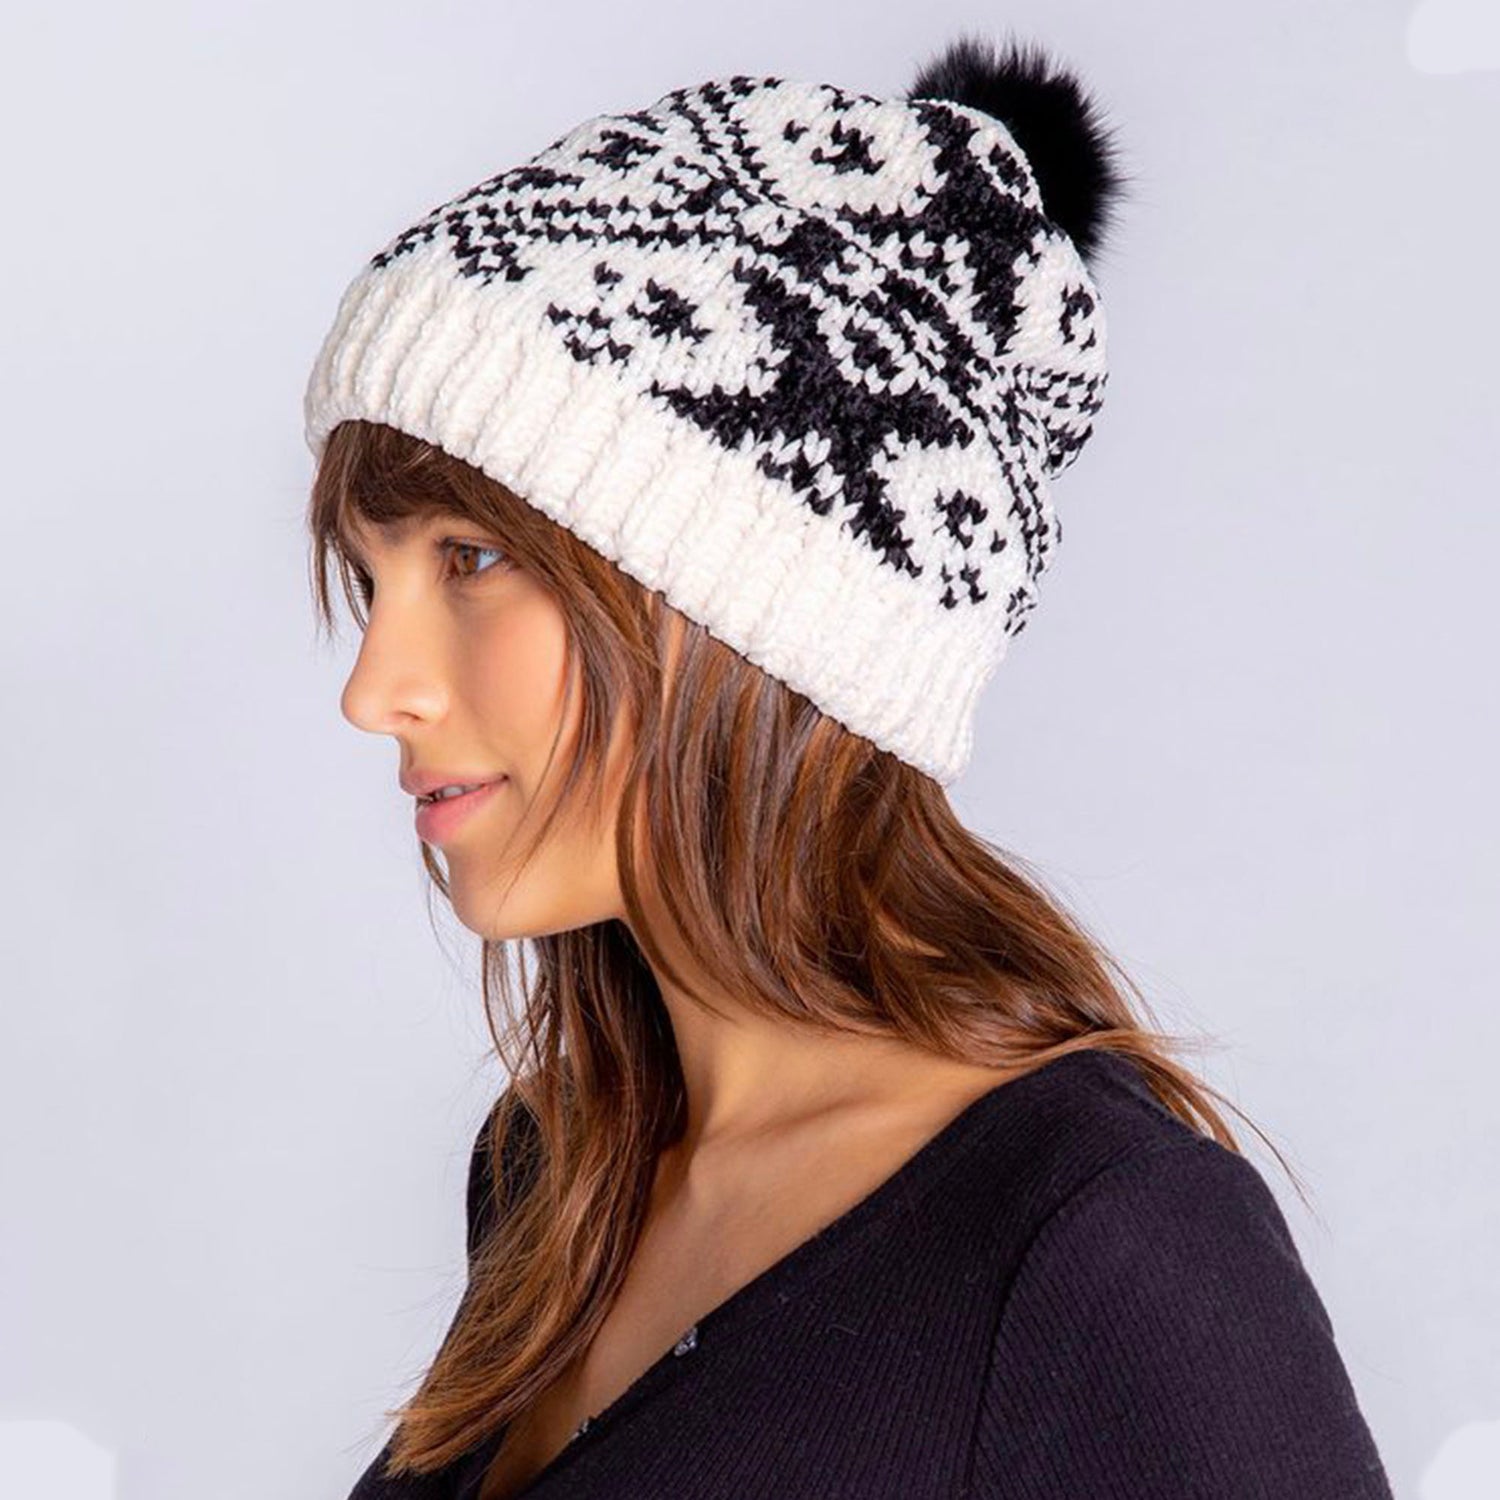 P.J. Salvage Cozy Beanie. Easy accessory style in this knit beanie with different pattern choices. A perfect mid-weight hat for changing seasons.